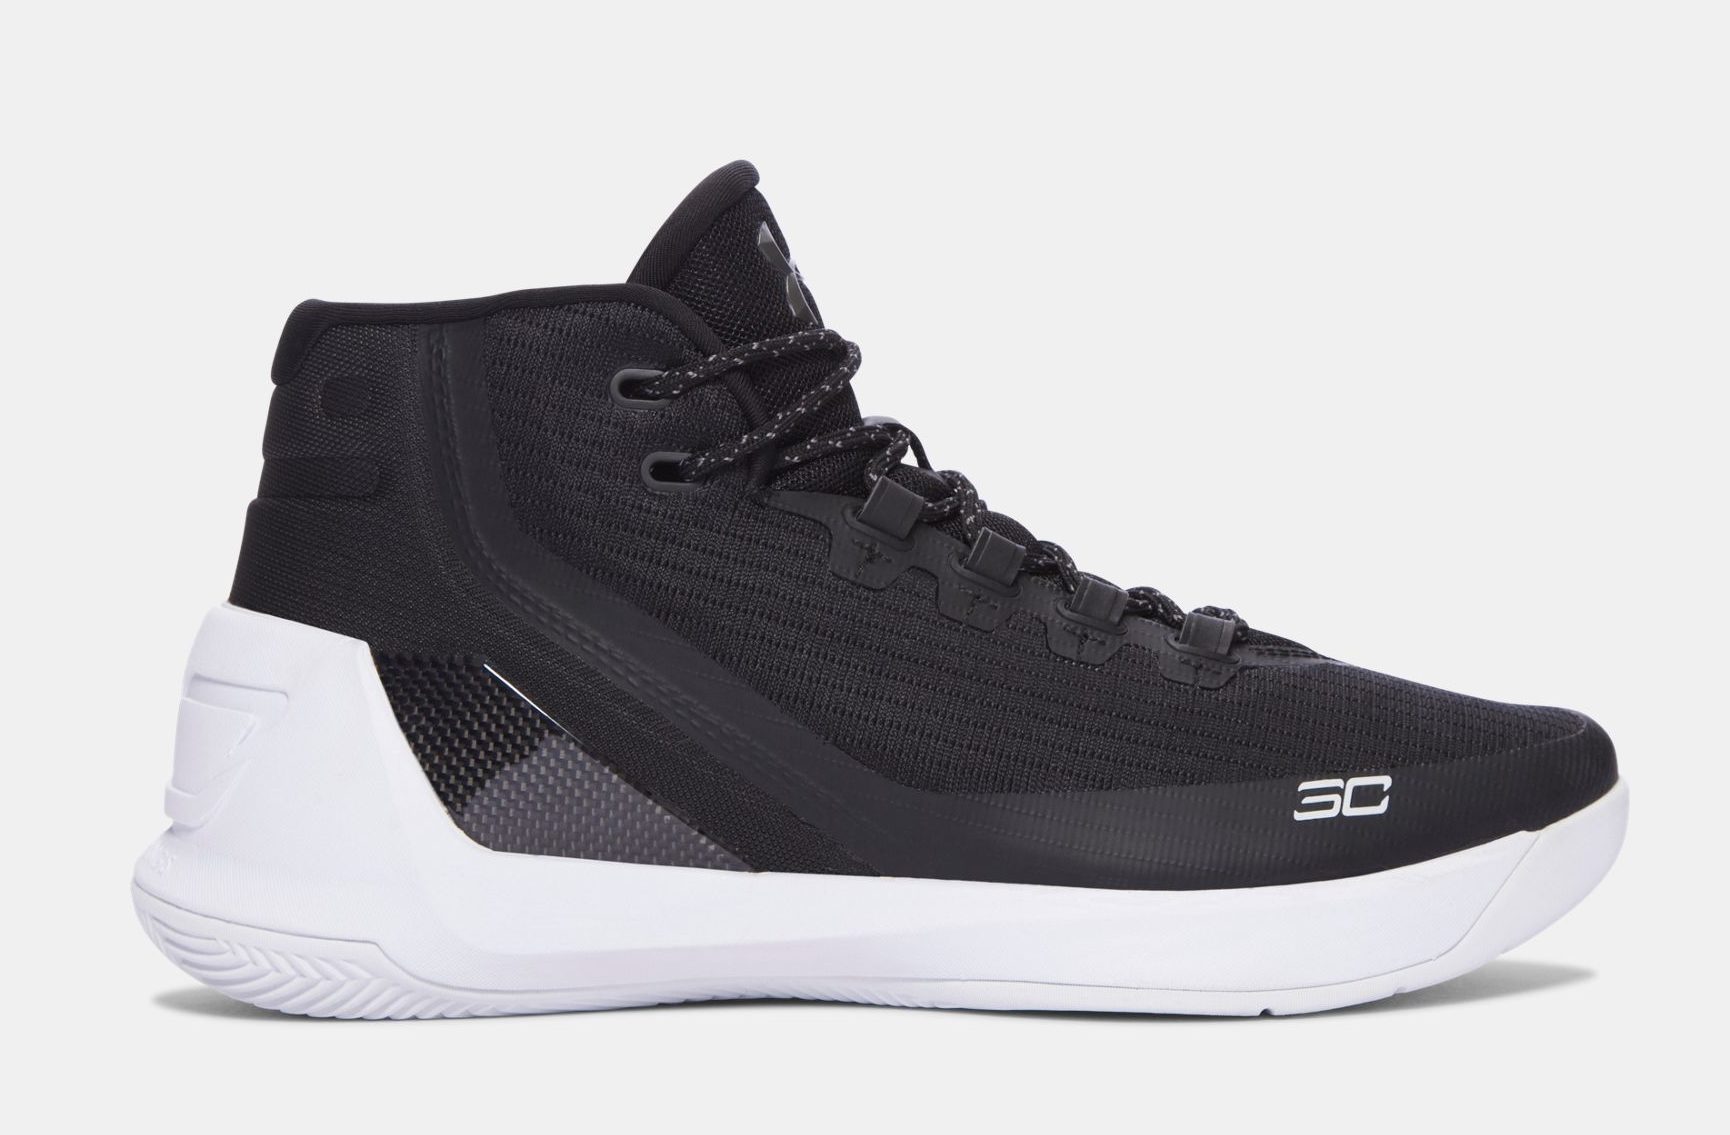 Under Armour Curry 3 - $140 $100